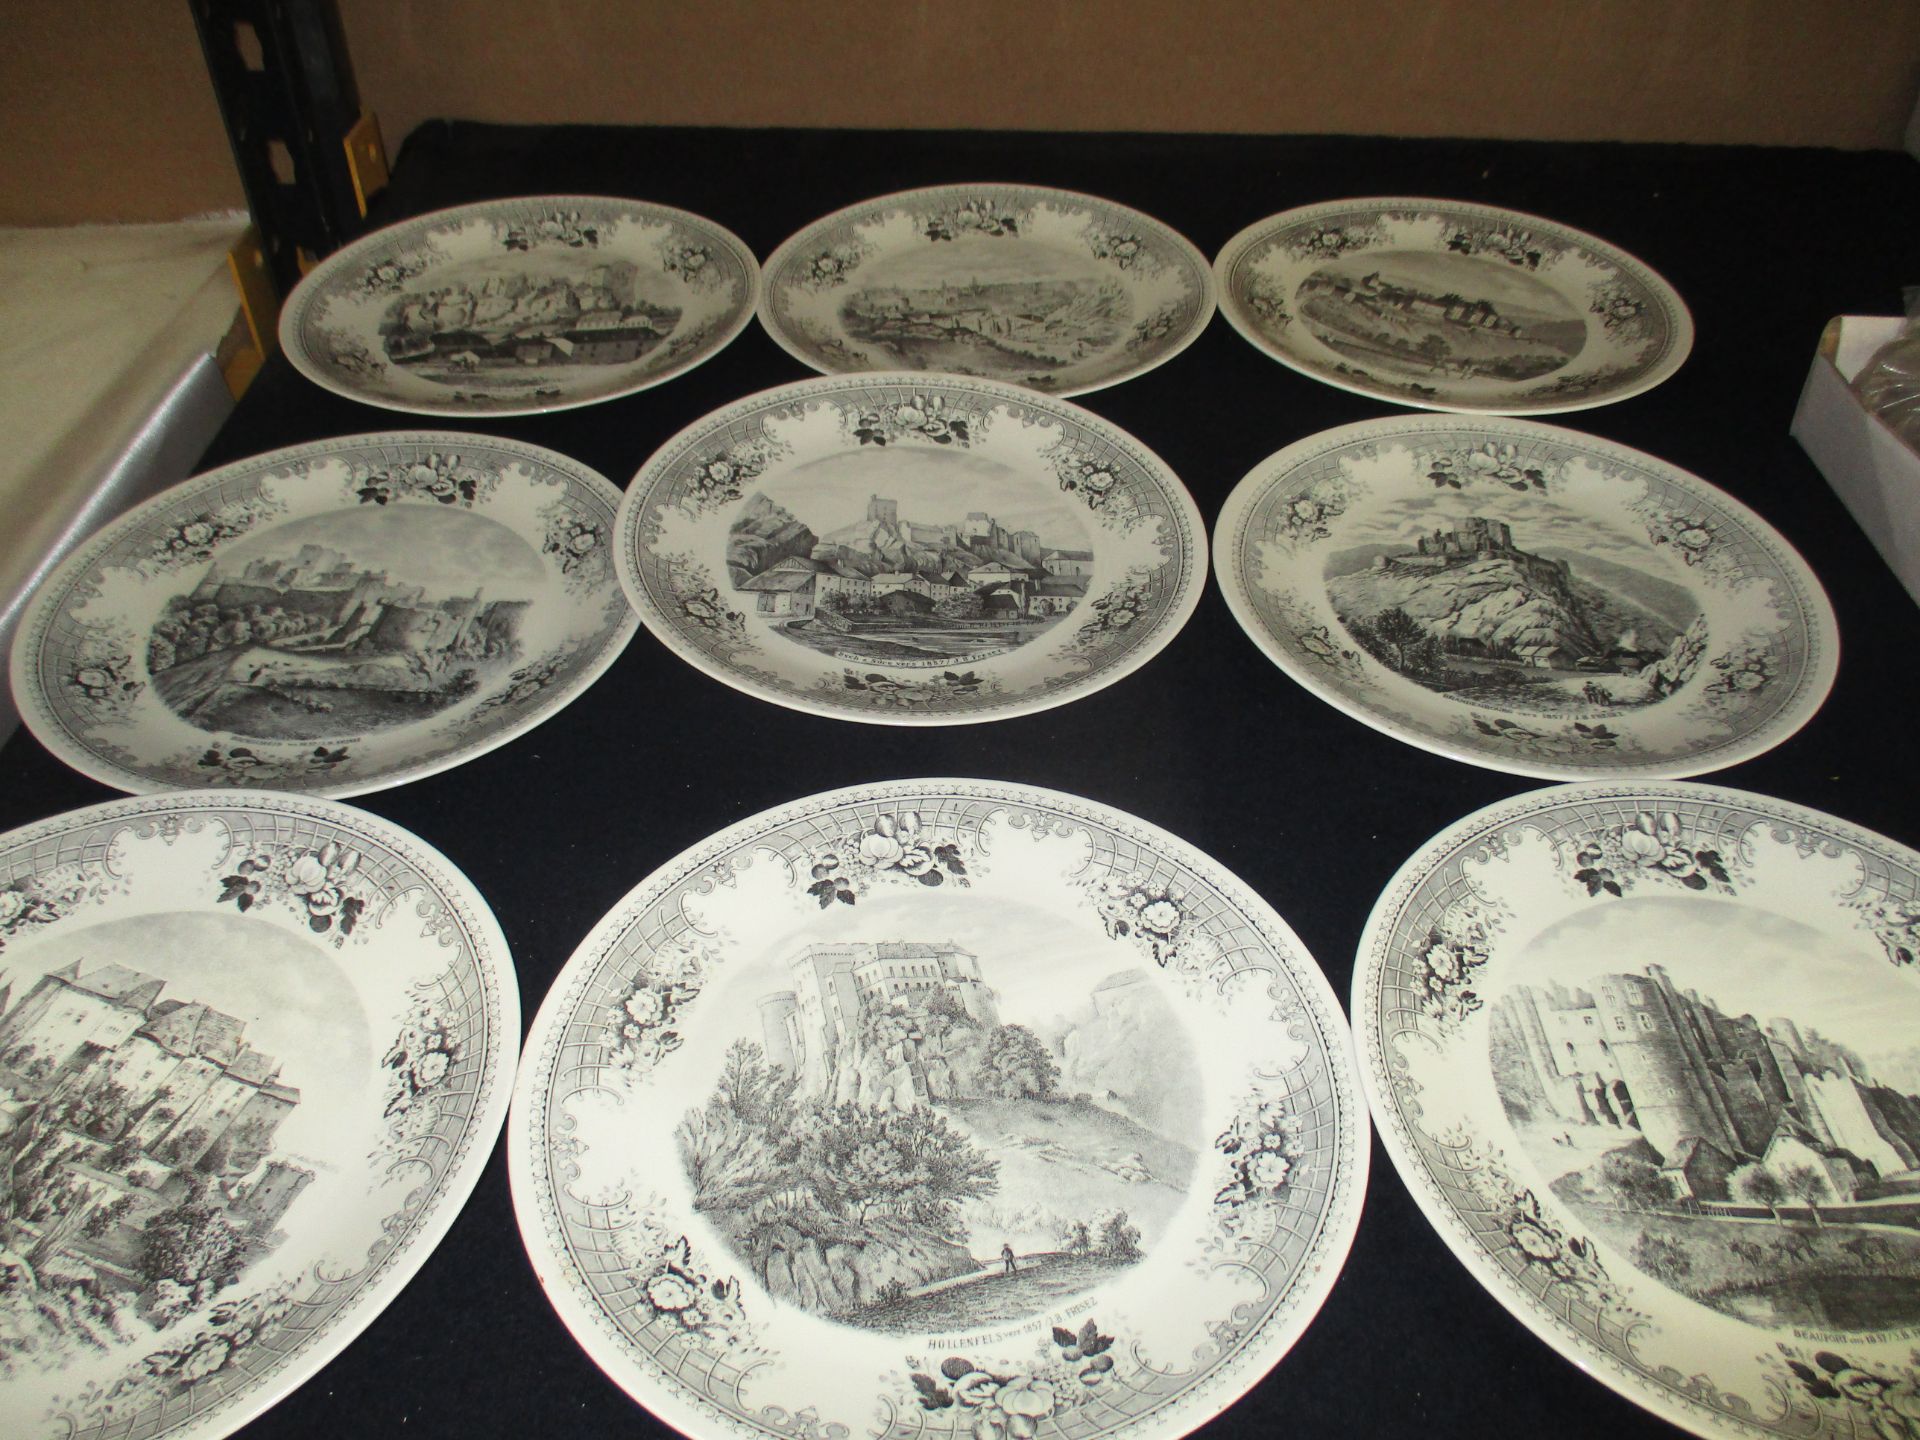 9 x Villeroy & Boch collectors plates depicting castles in Luxembourg